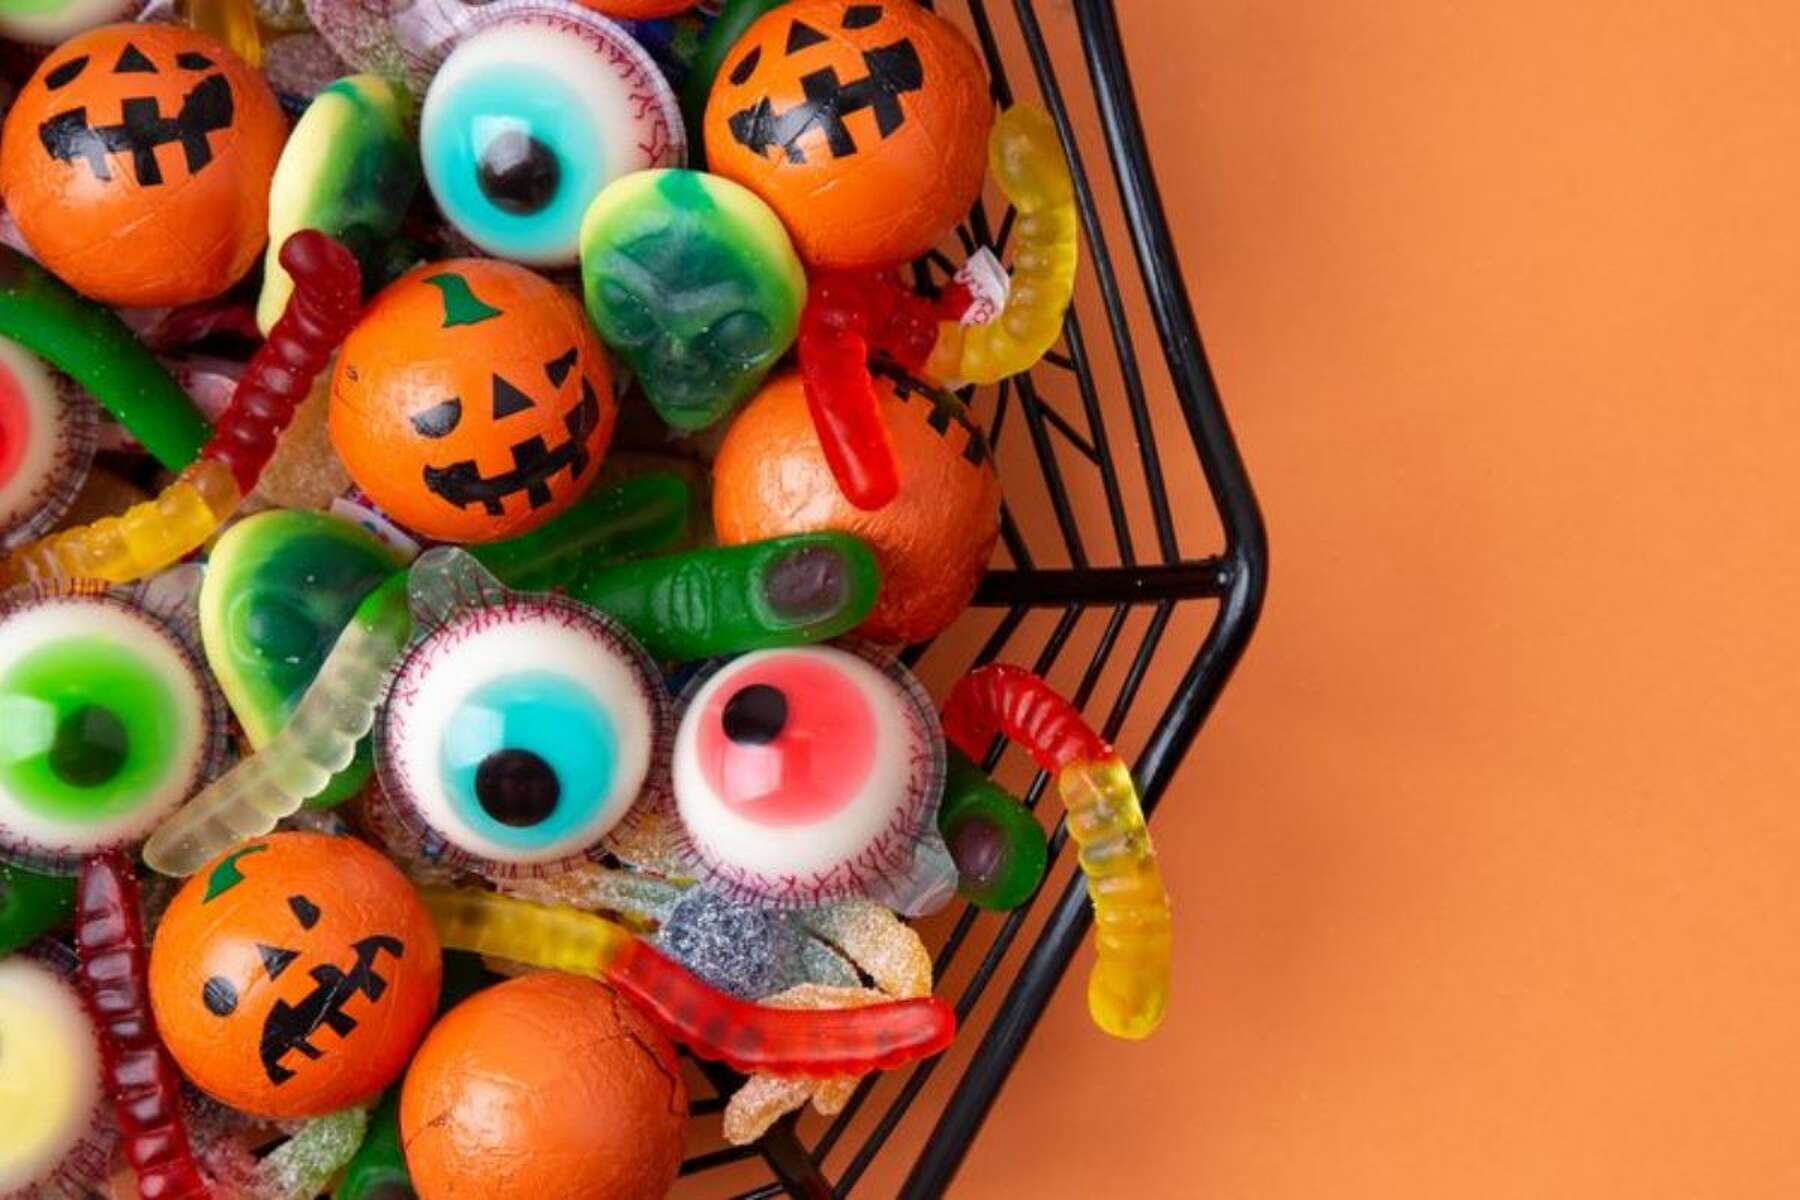 Trick or trash: Candy makers grapple with plastic waste